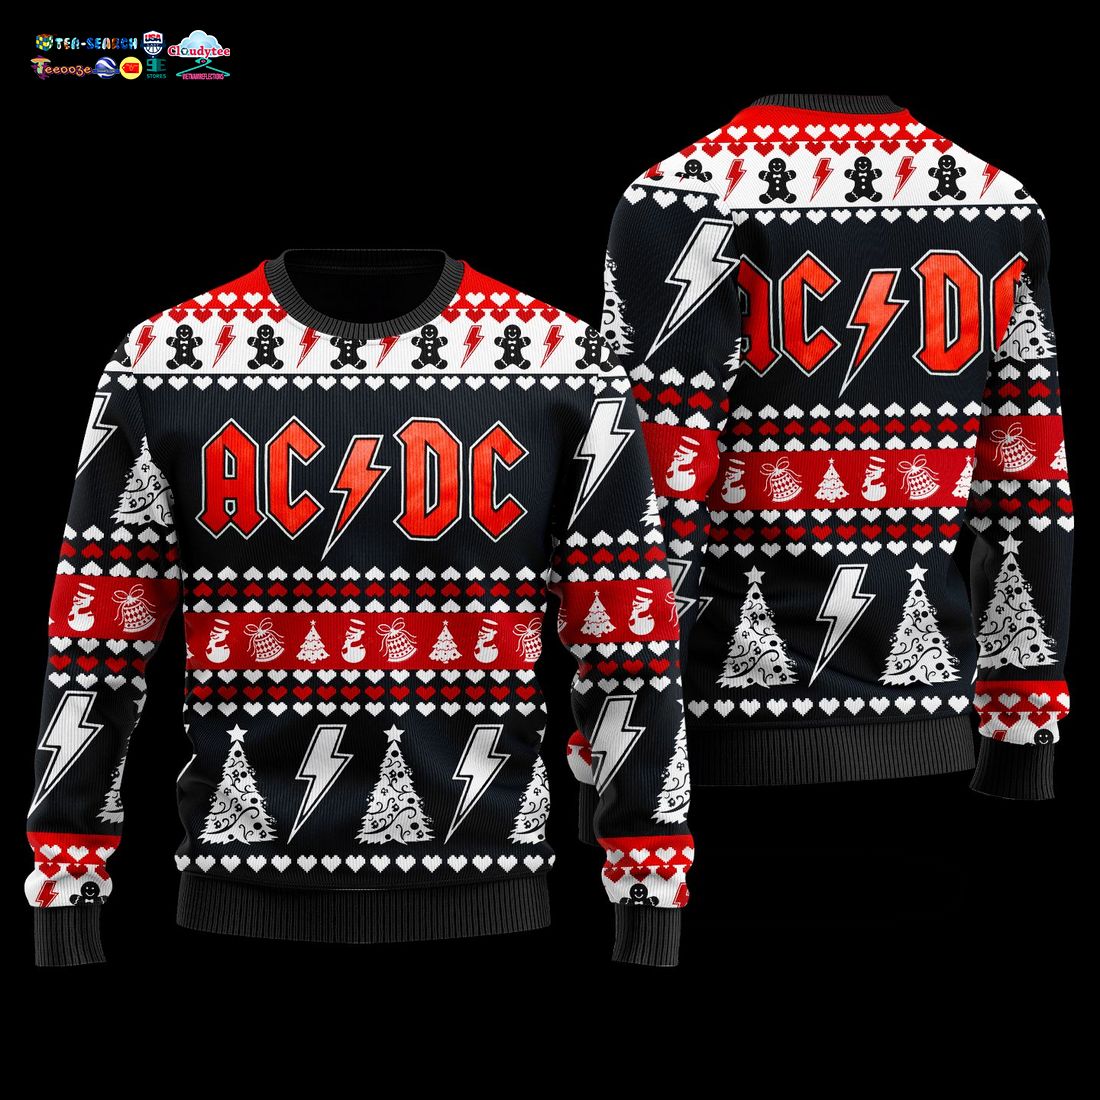 AC DC Ugly Christmas Sweater - You look lazy